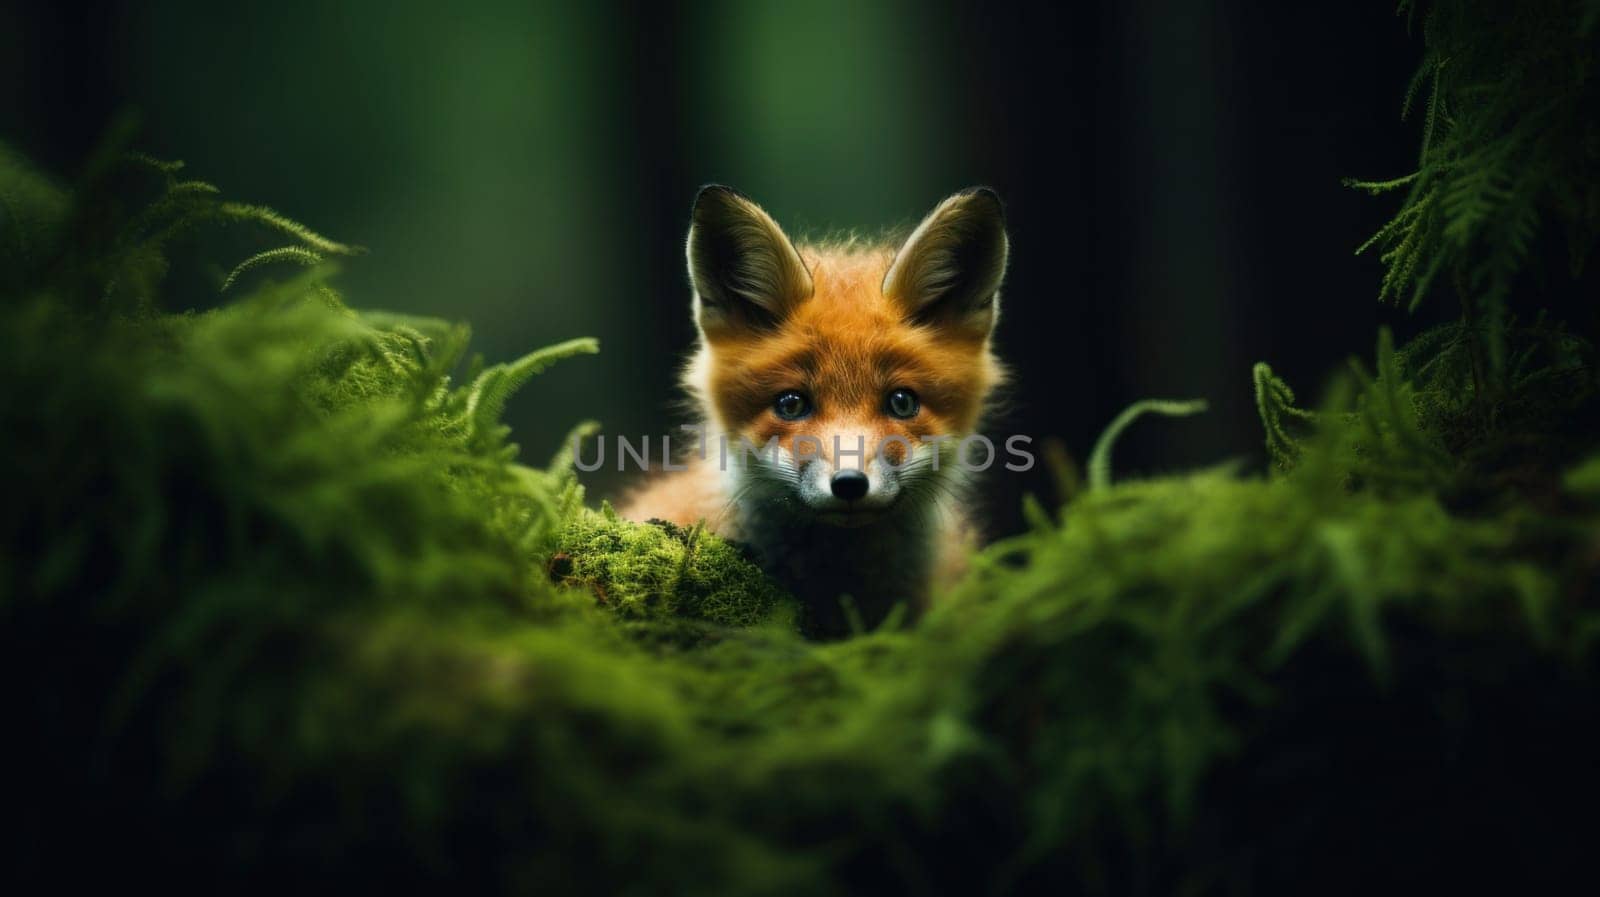 A small fox peeking out from behind a green bush